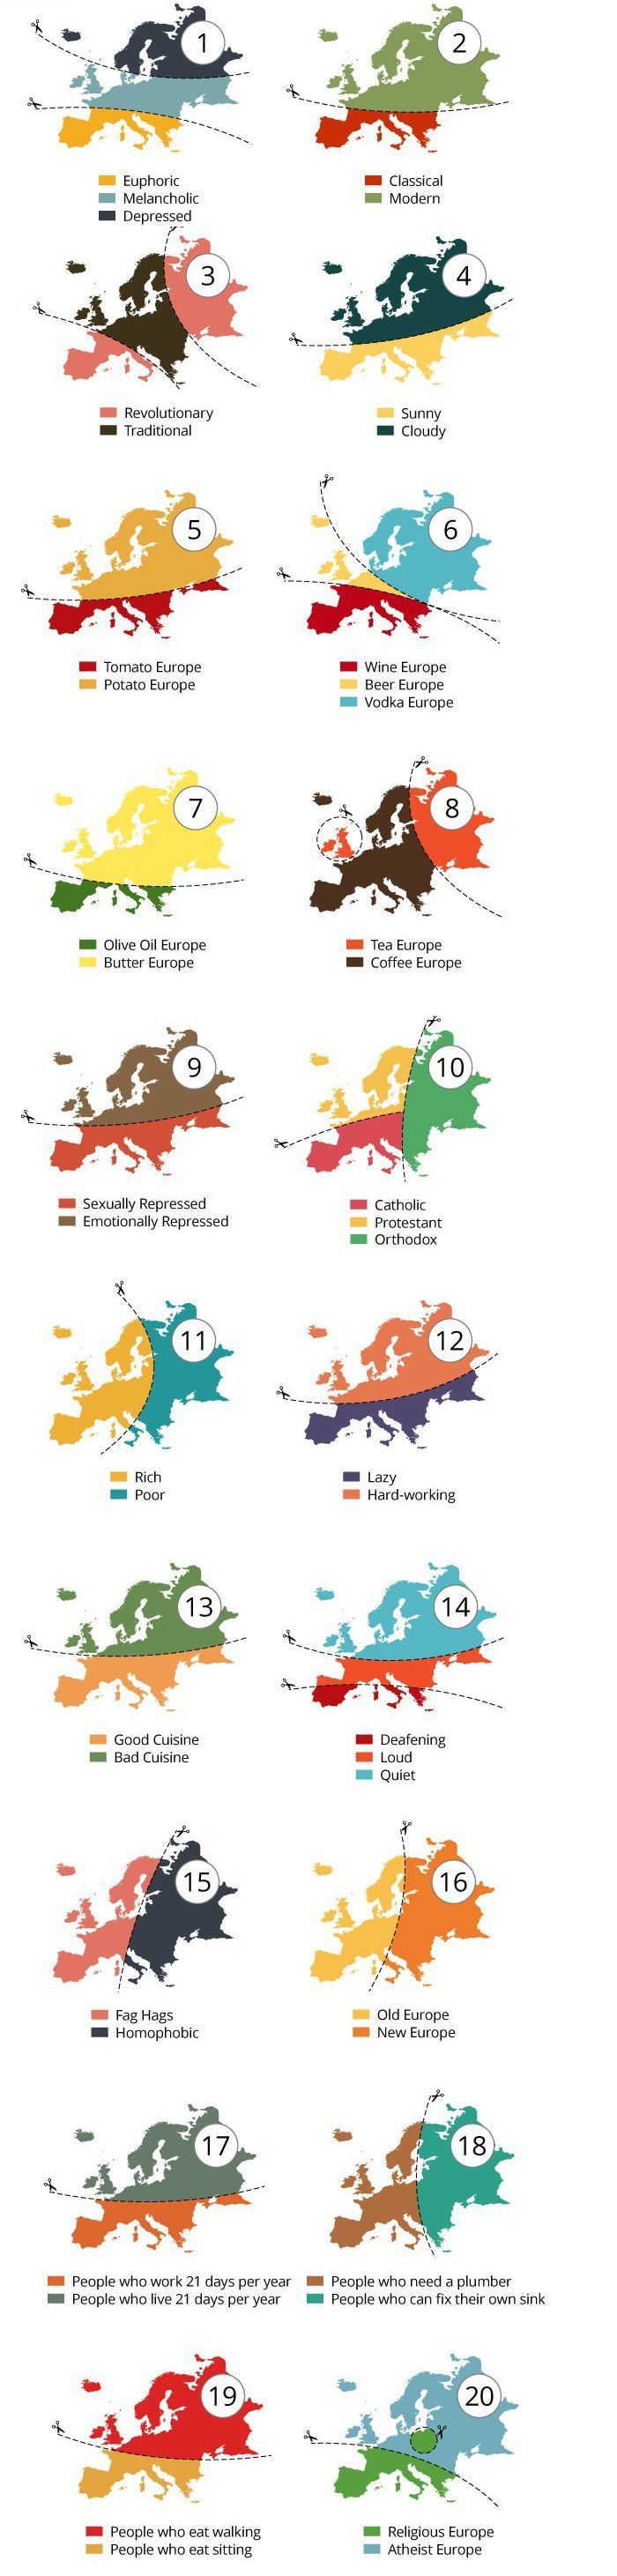 This Infographic Explains All You Need To Know About Europe